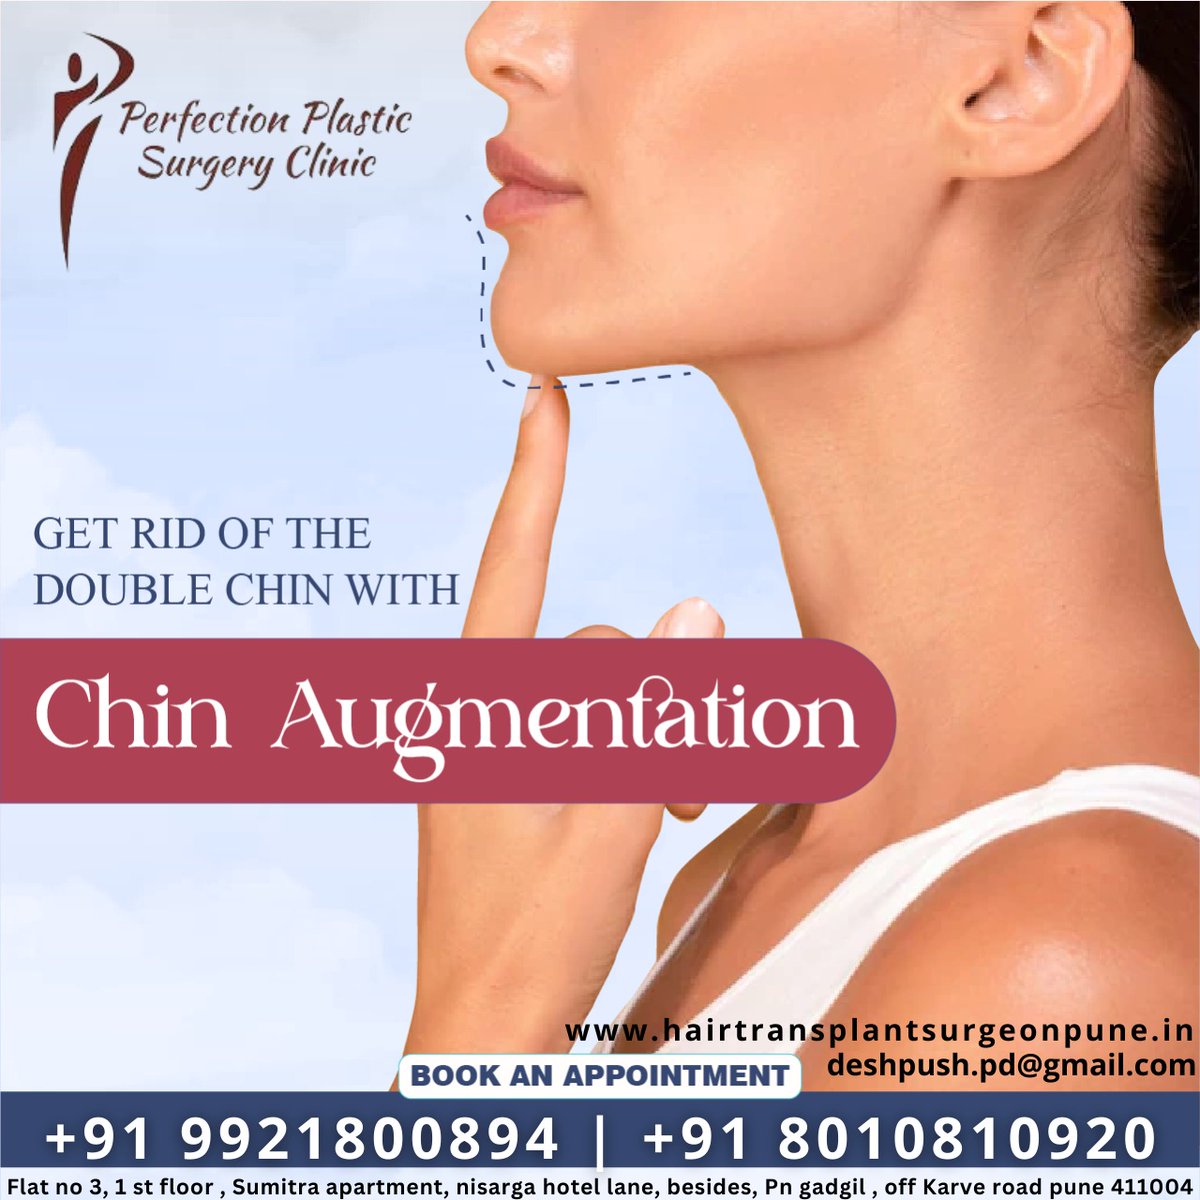 Get Rid of the Double Chin With Augmentation
Book An Appointment
Call : - +91 9921800894
Call : - +91 8010910920

#perfectionplasticsurgeryclinic #chin #chinaugmentation #doublechin